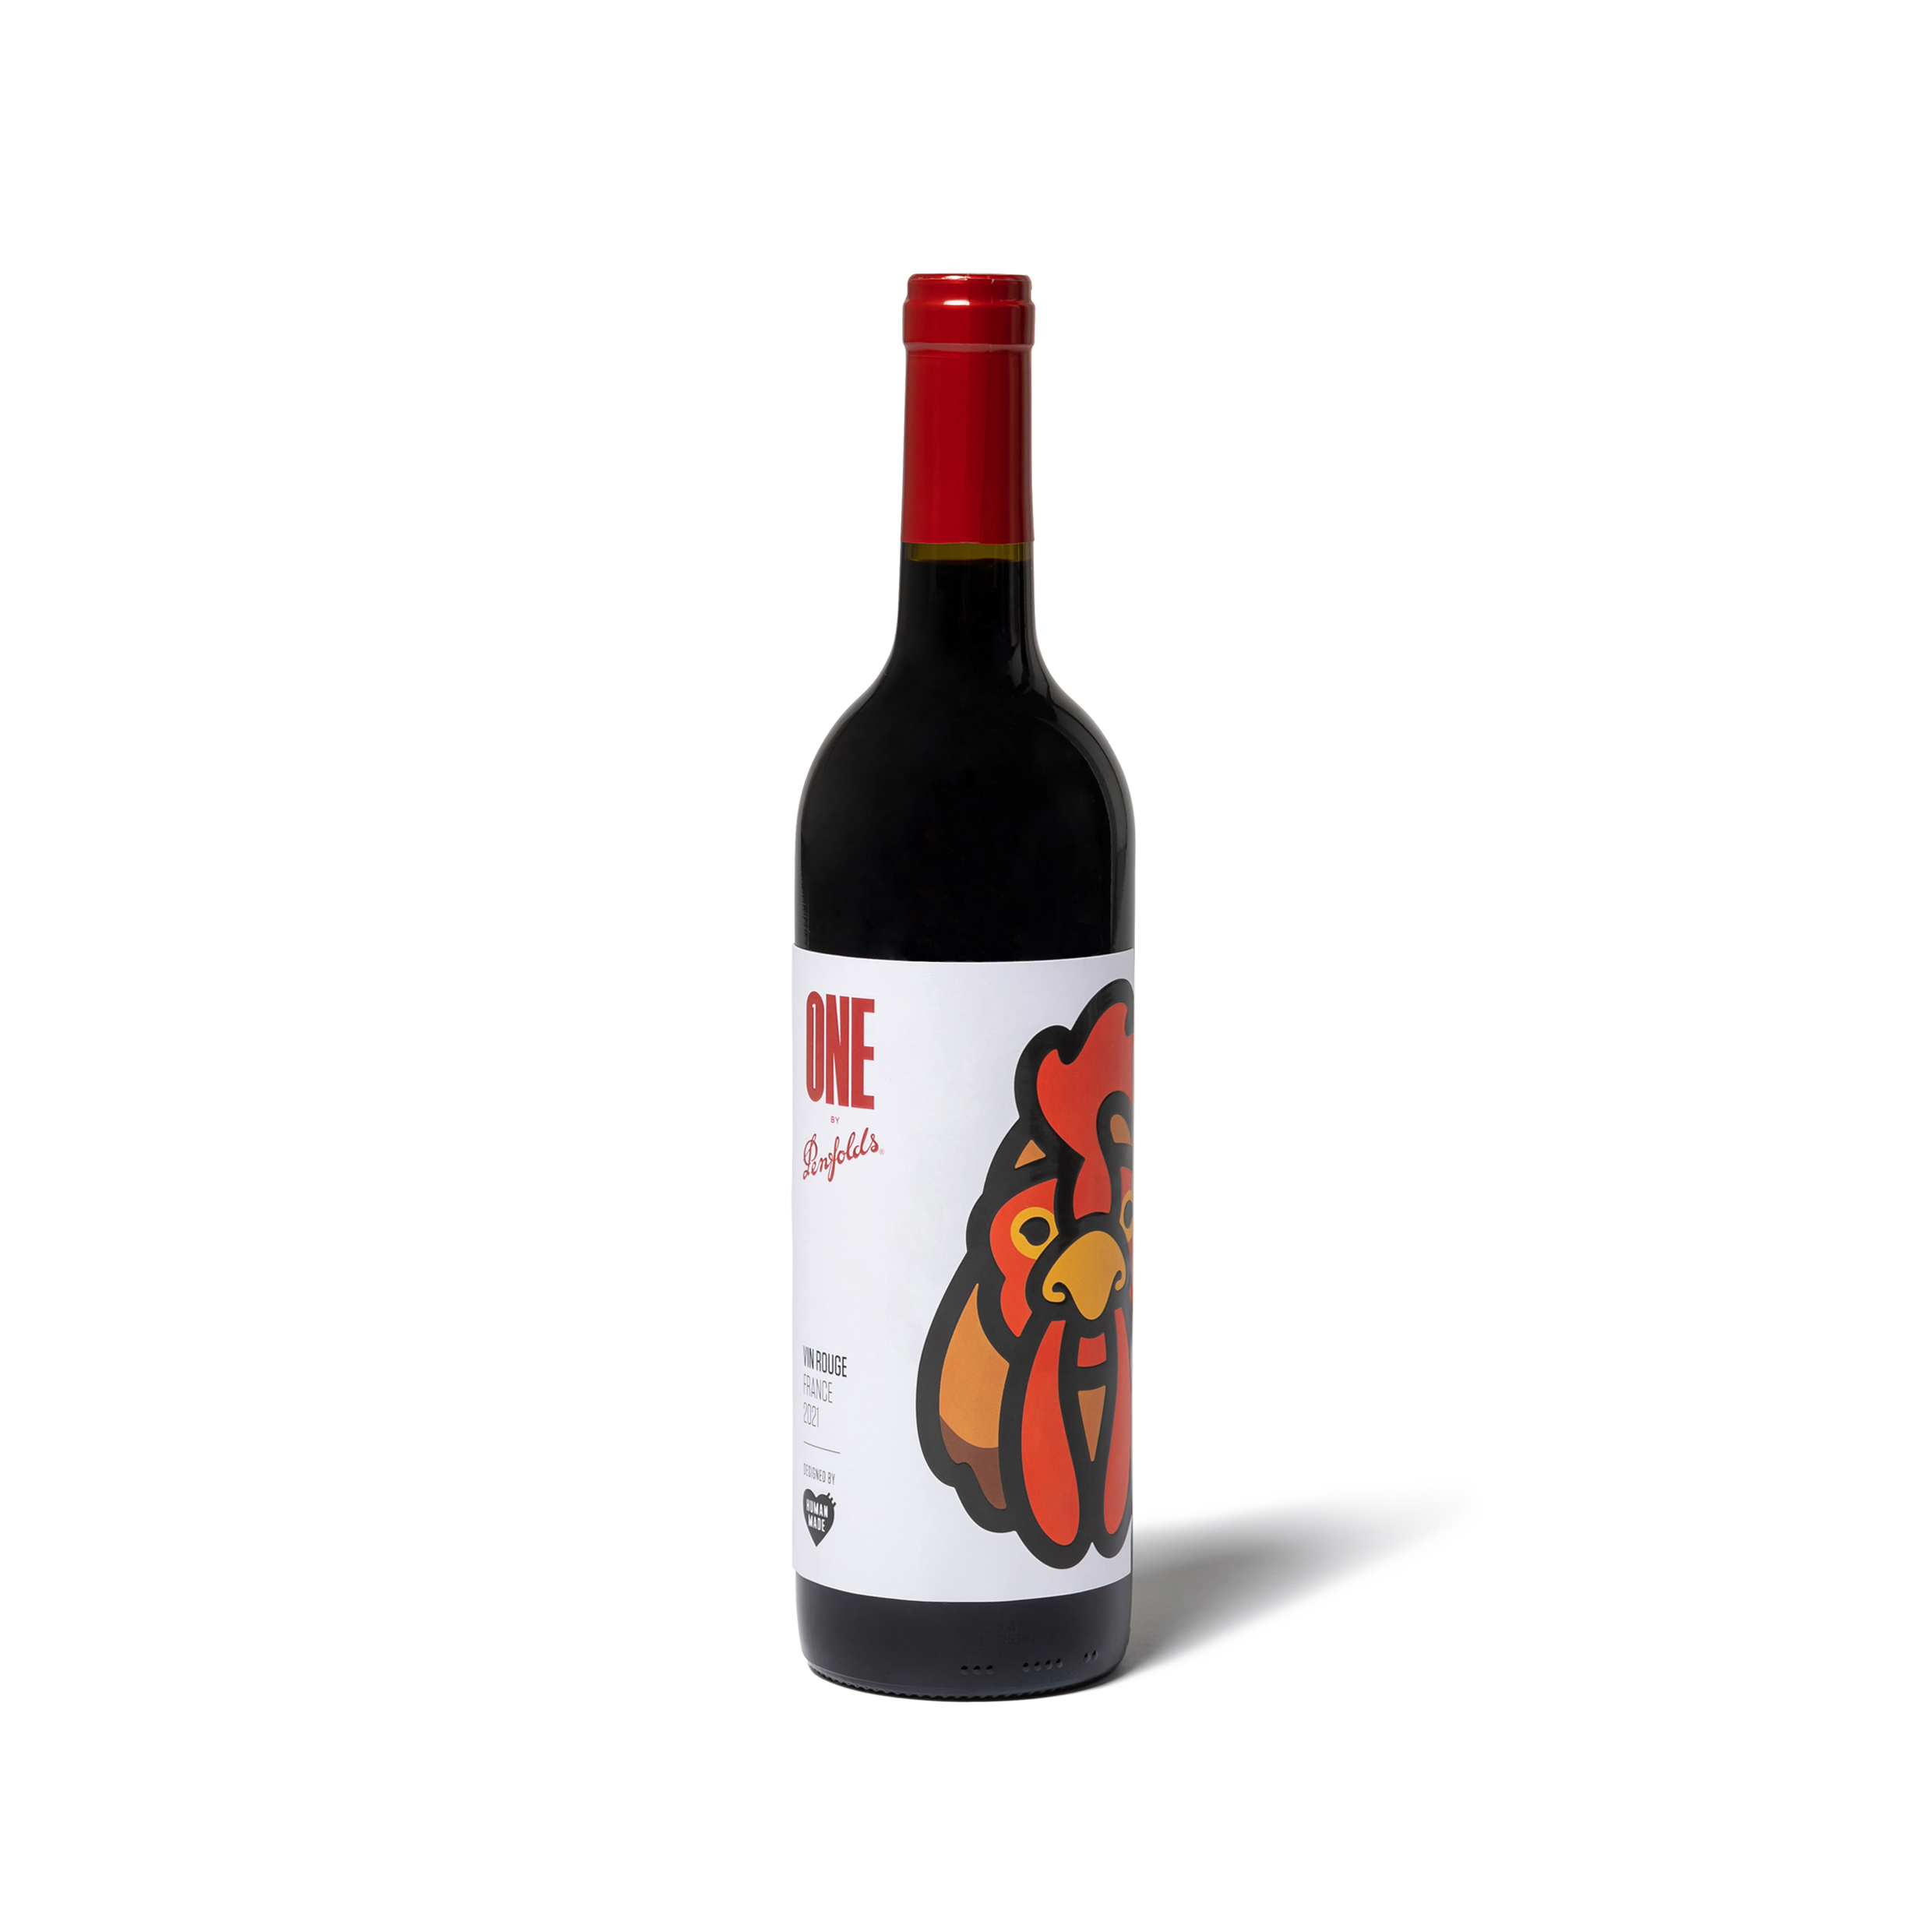 Human Made x Penfolds Collaboration: “One by Penfolds” Release